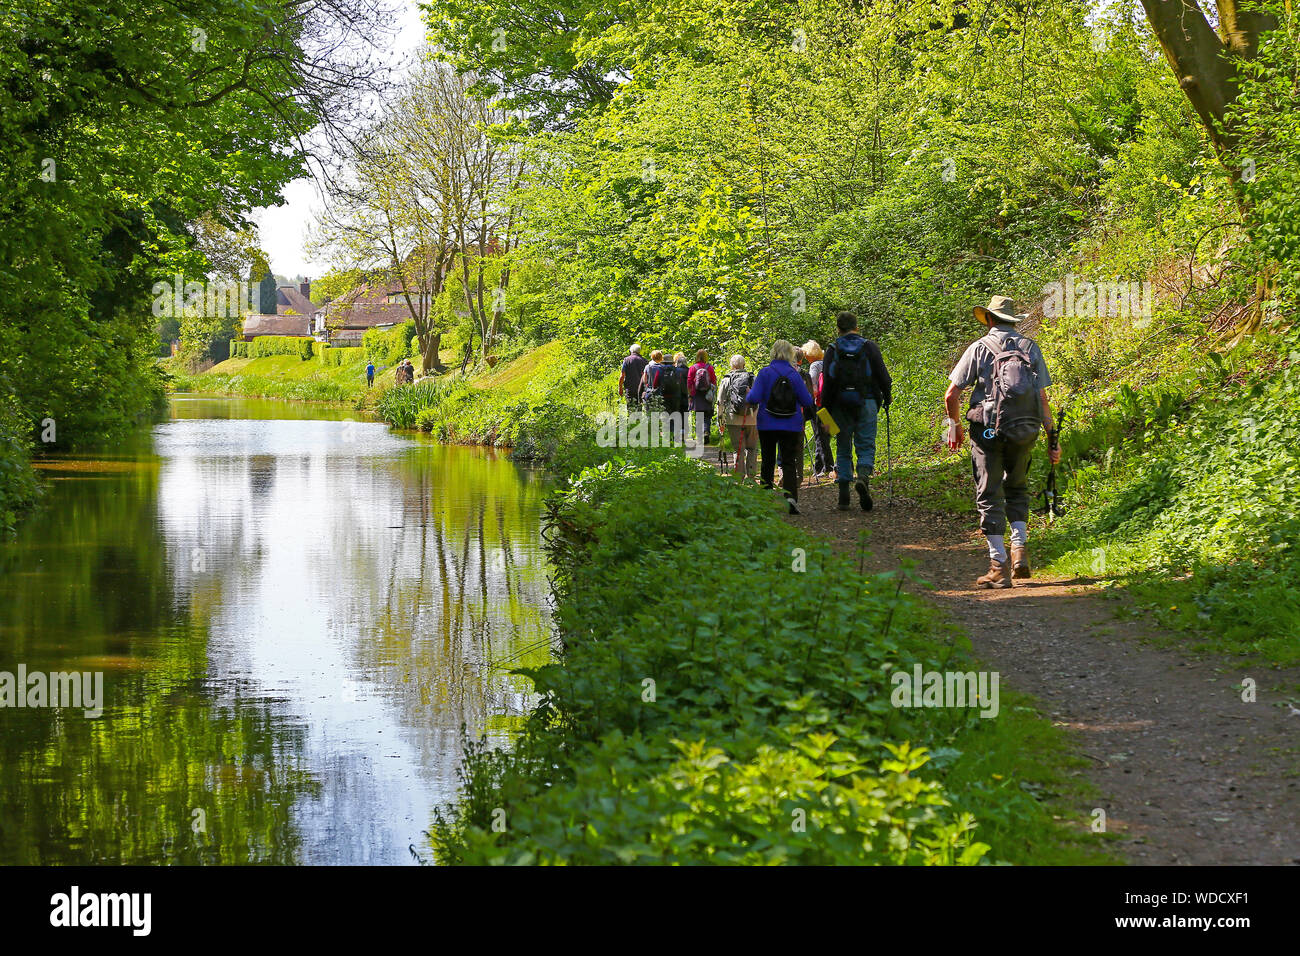 A group of elderly walkers or ramblers walking along a canal towpath on the Macclesfield branch of the Trent and Mersey Canal Cheshire England UK Stock Photo